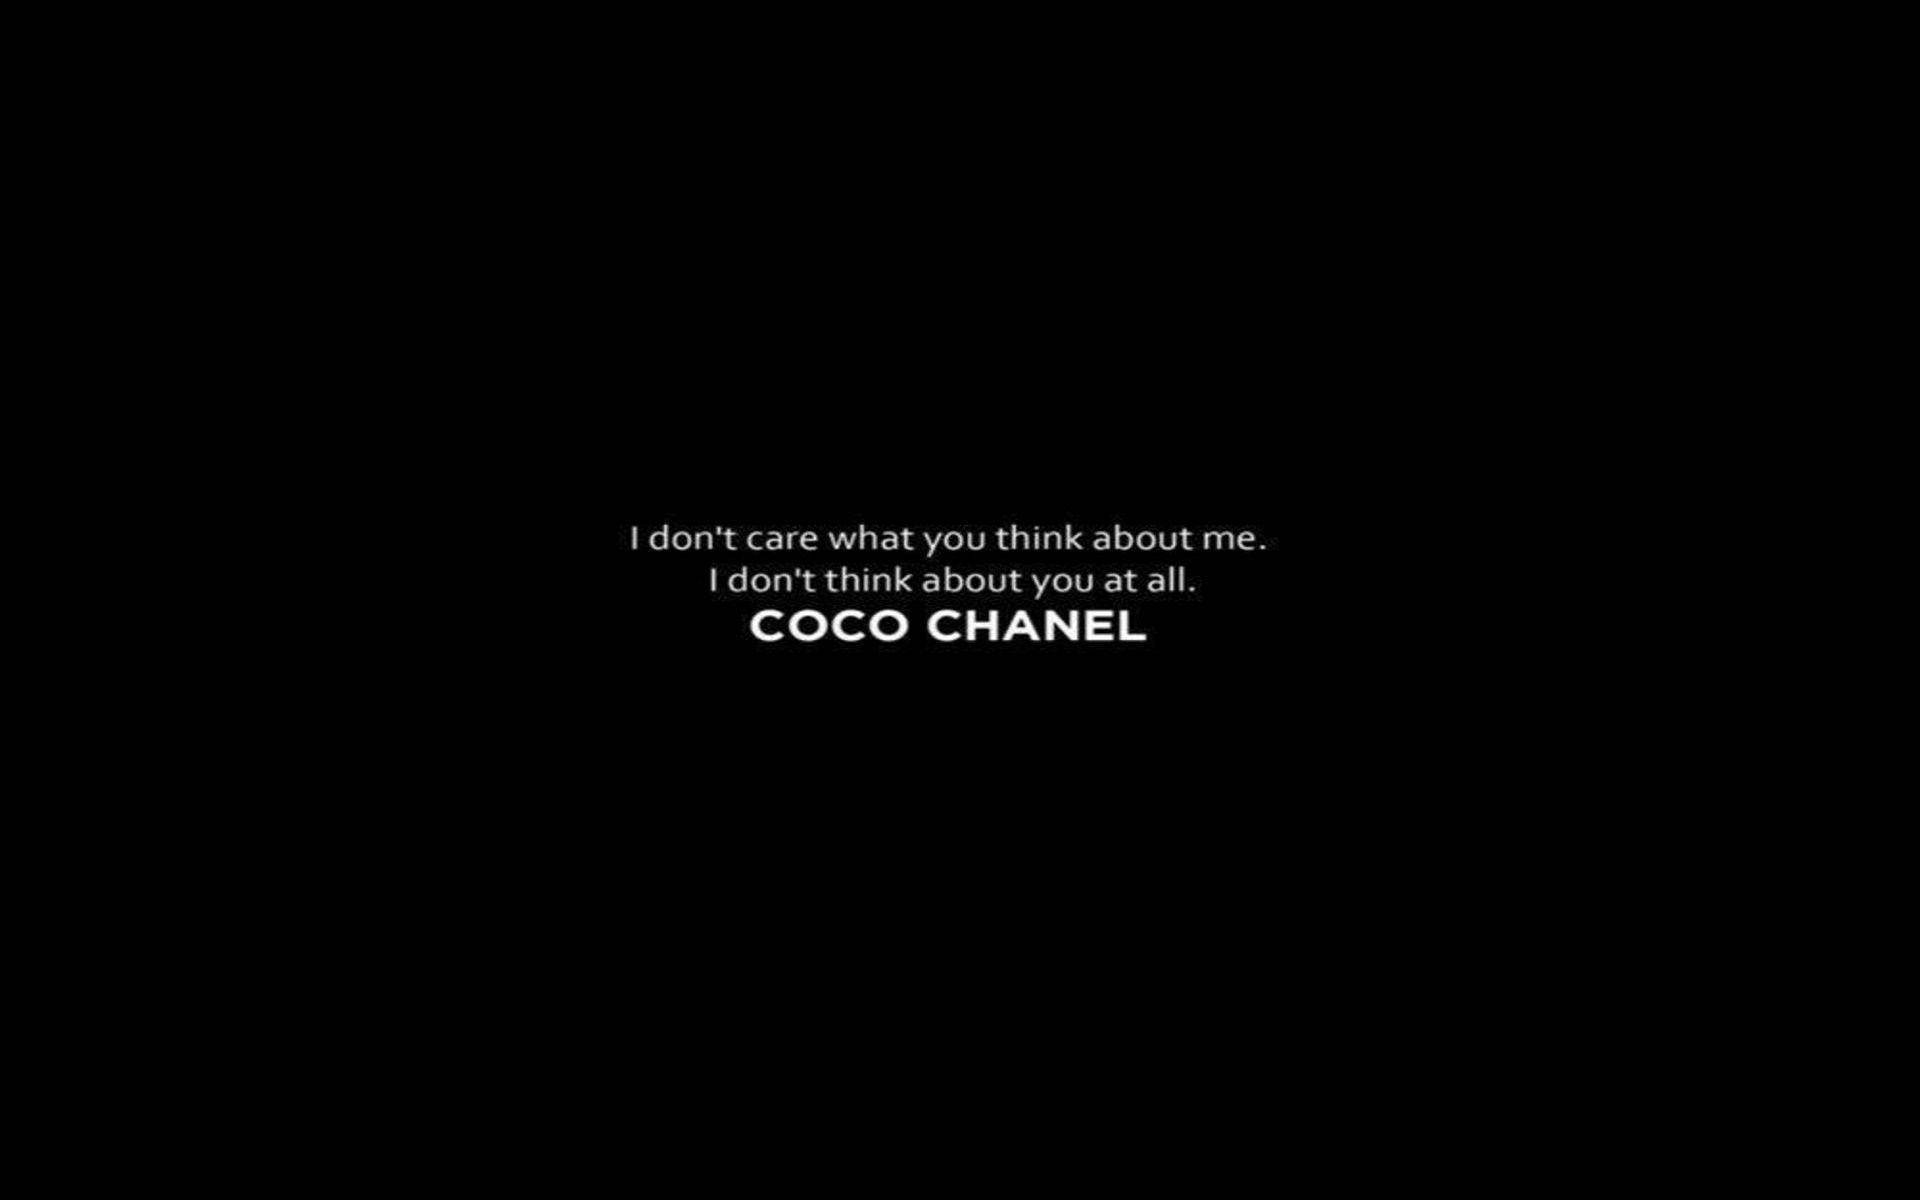 Caption: Elegant Black and White Coco Chanel Aesthetic Laptop View Wallpaper